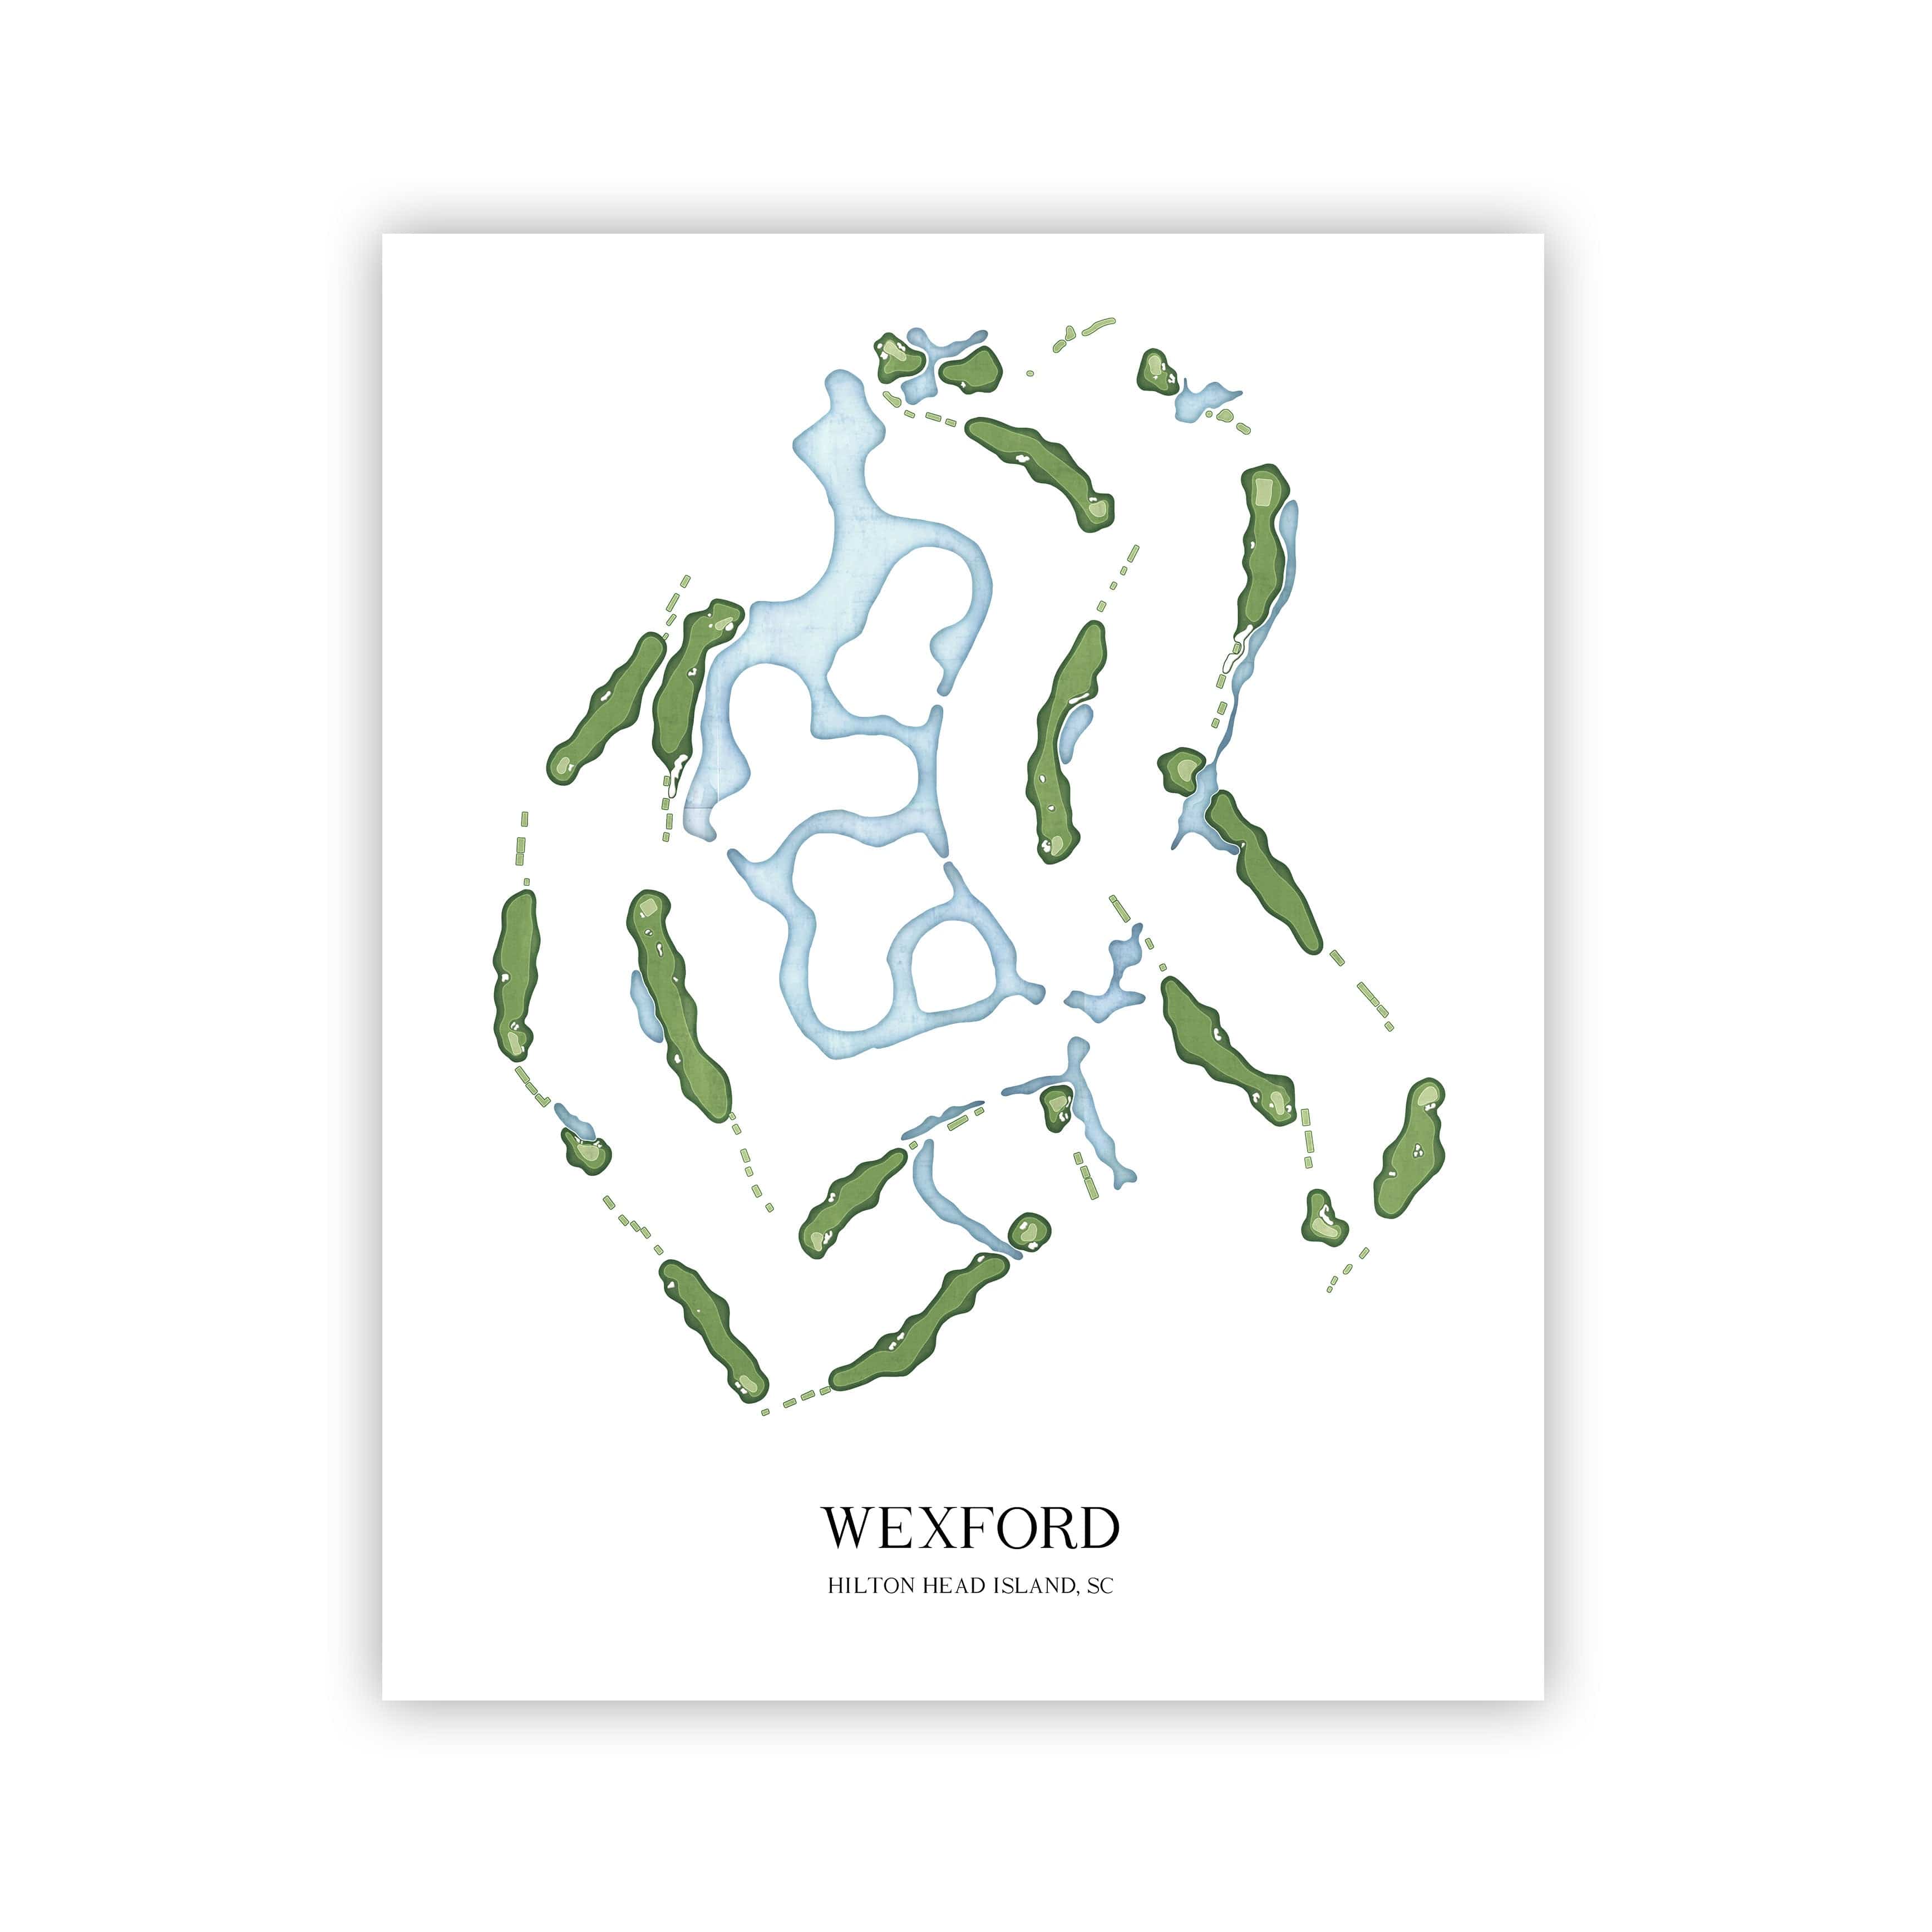 The 19th Hole Golf Shop - Golf Course Prints -  Wexford Golf Course Map